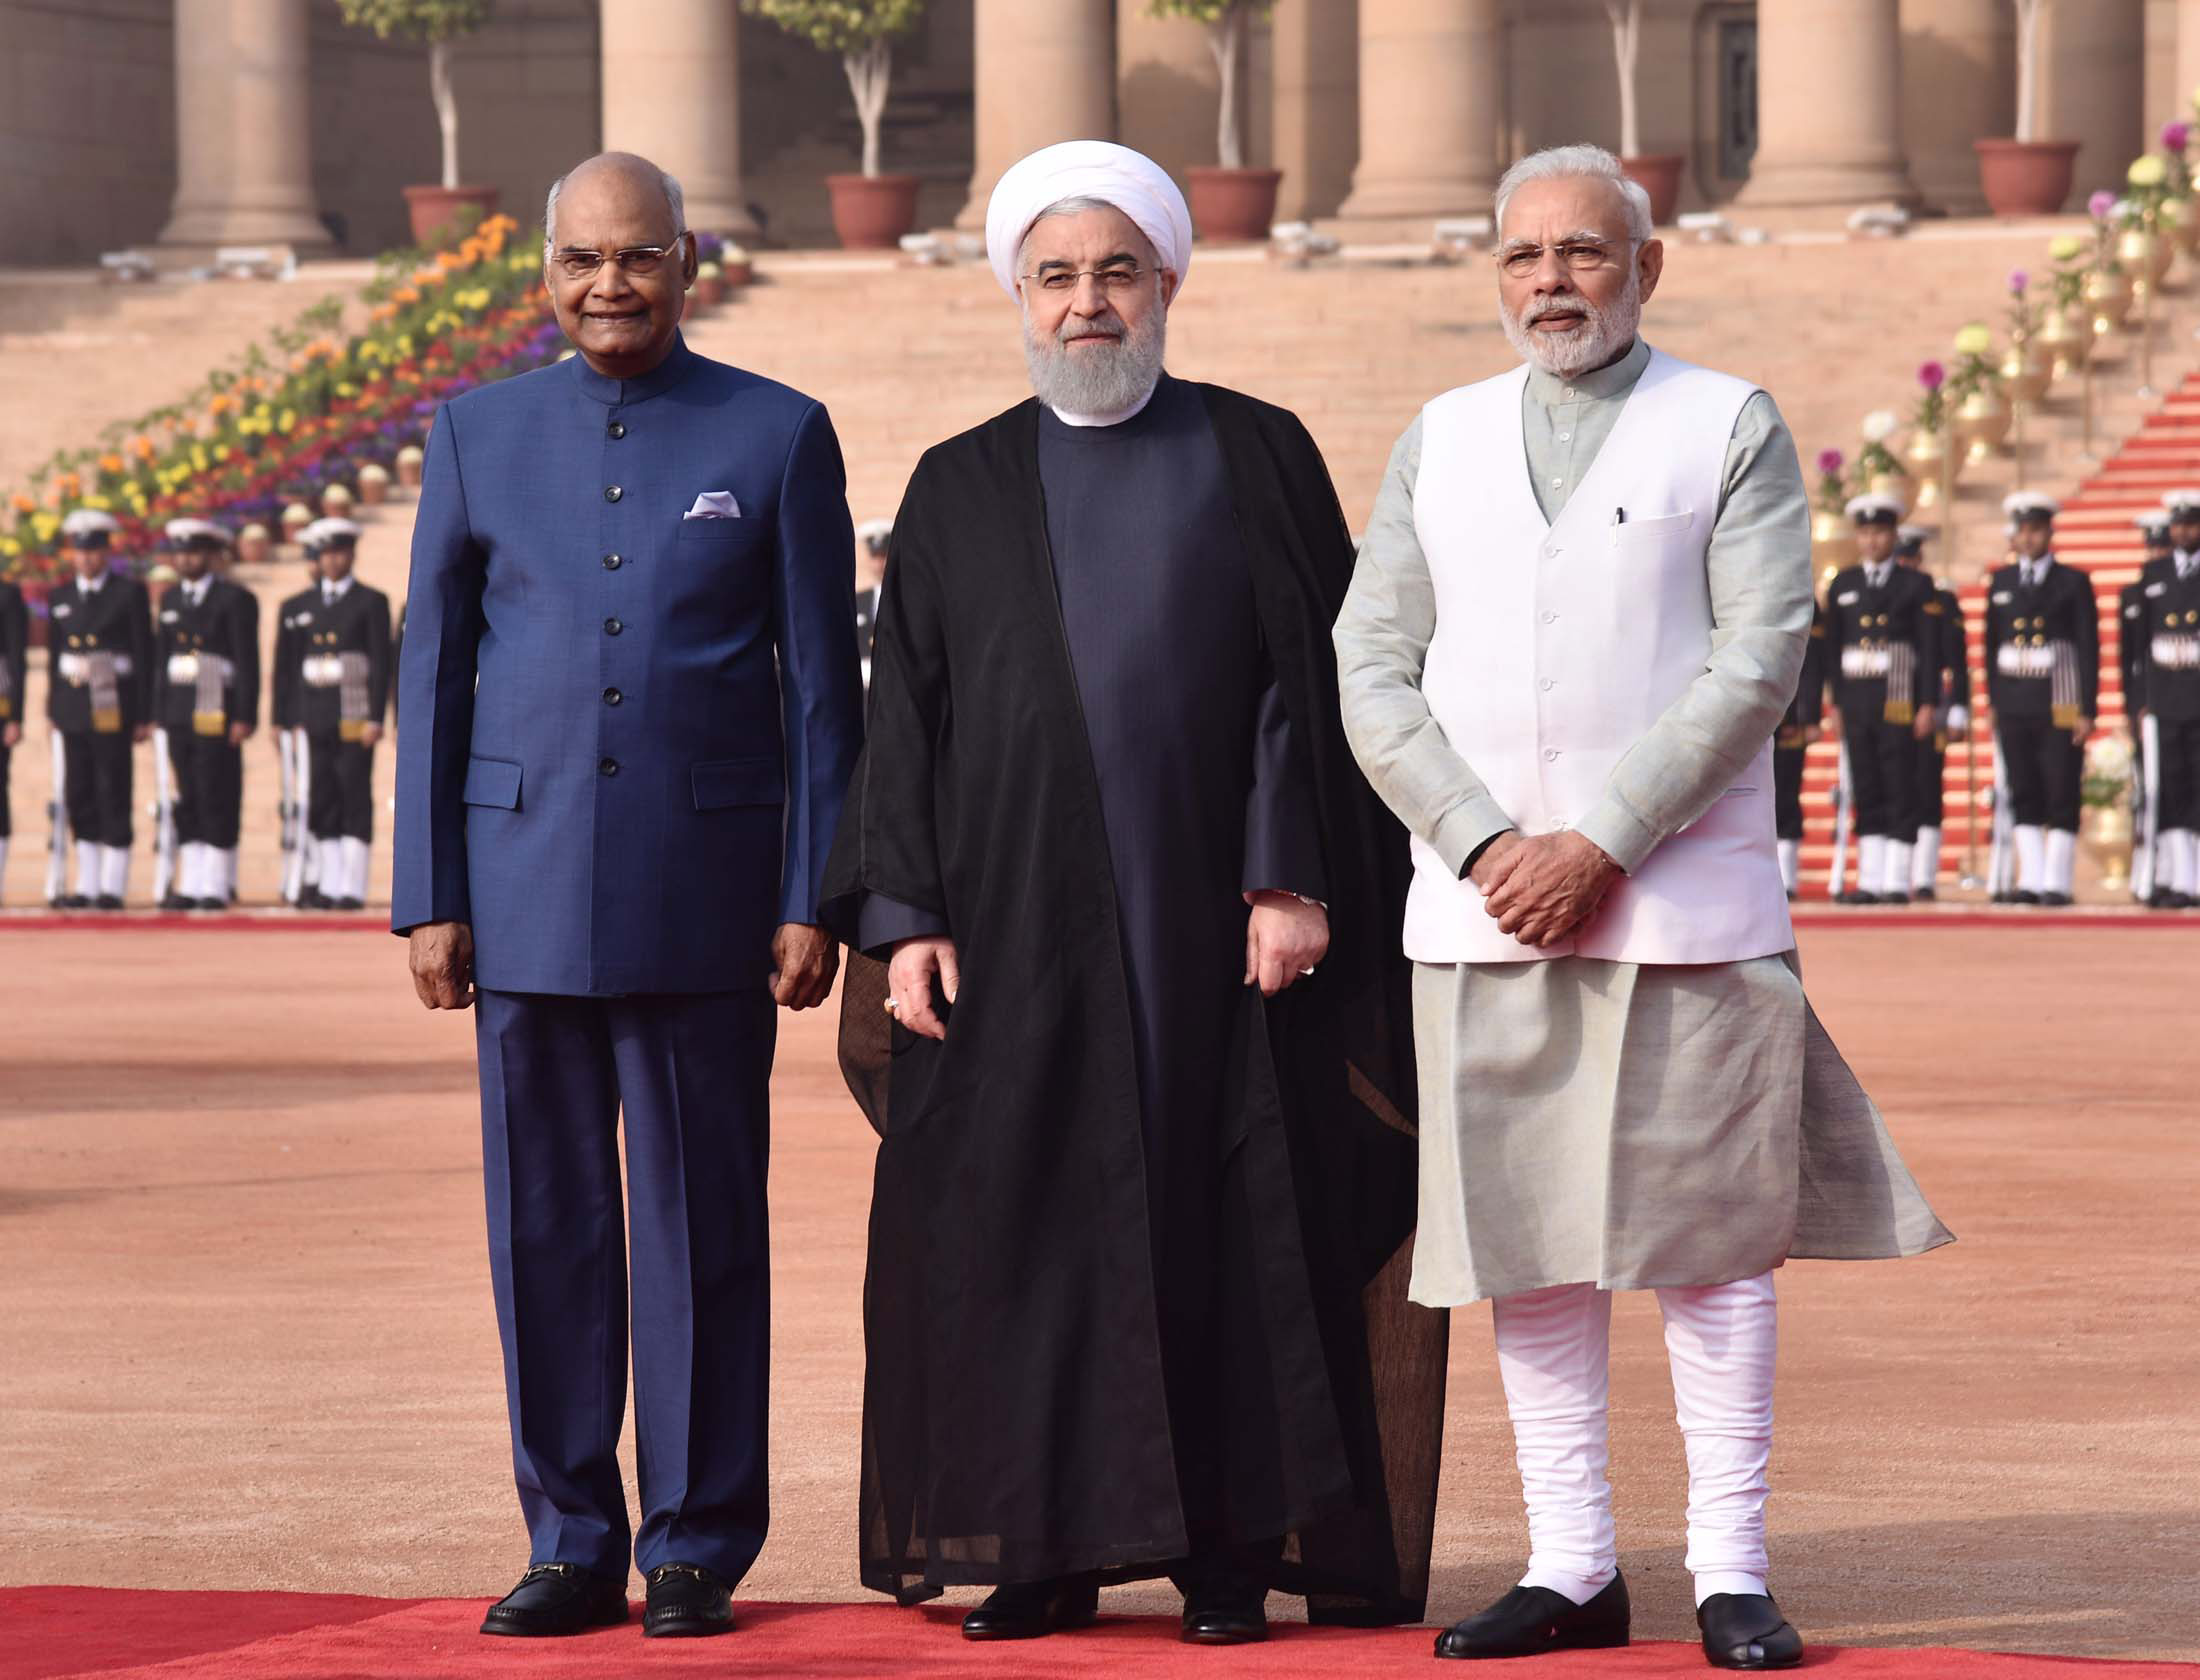 Sanctioning Iran, Developing Relations with India, and the New Economic Order